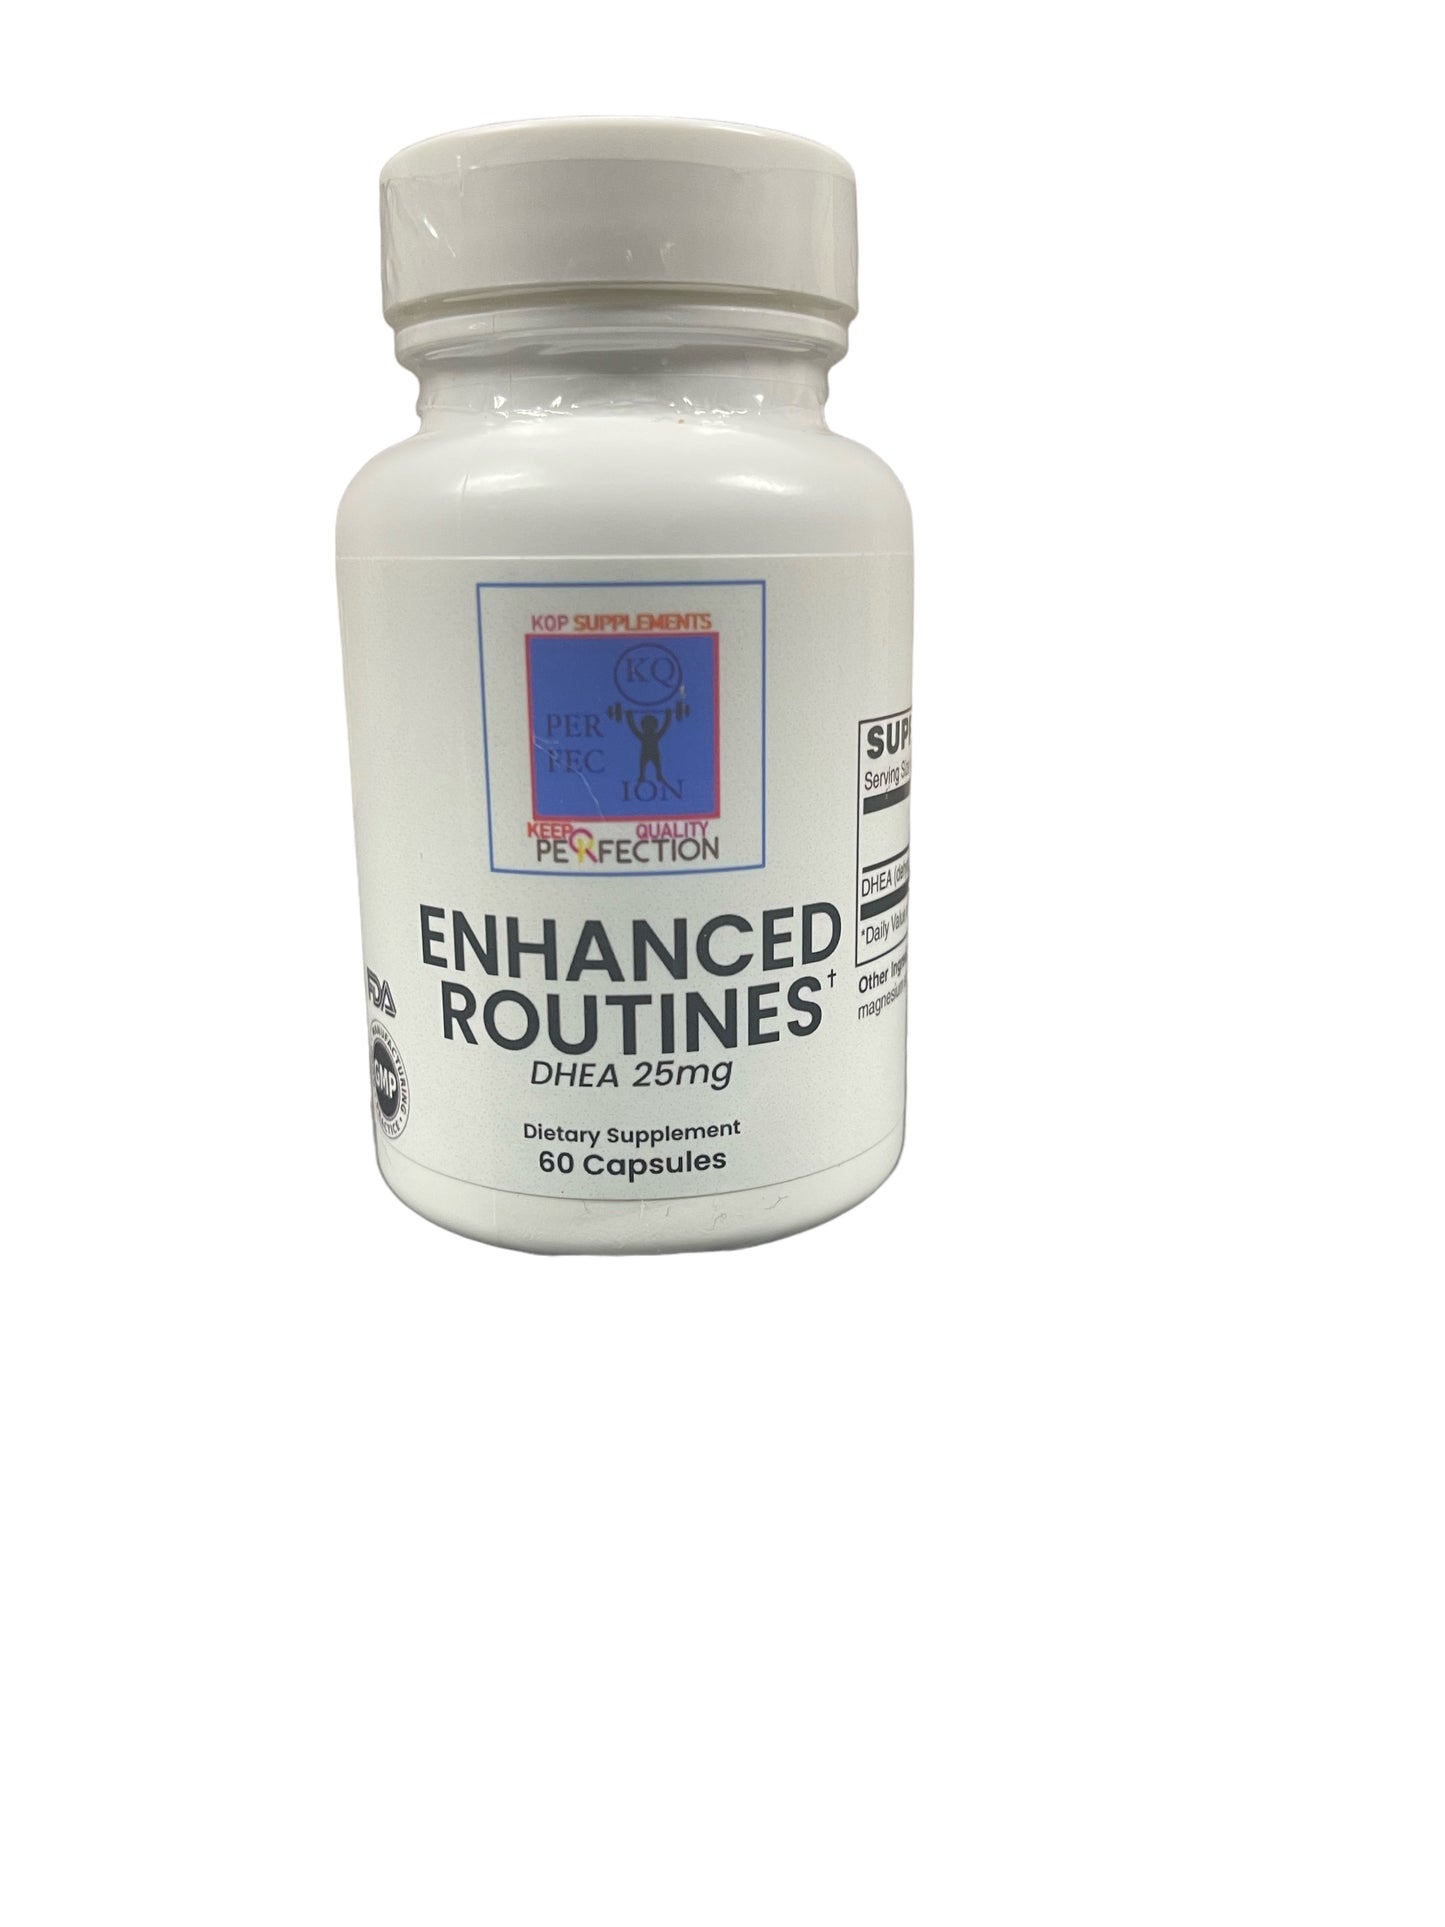 ENHANCED ROUTINES DHEA 25mg | KQP Supplements